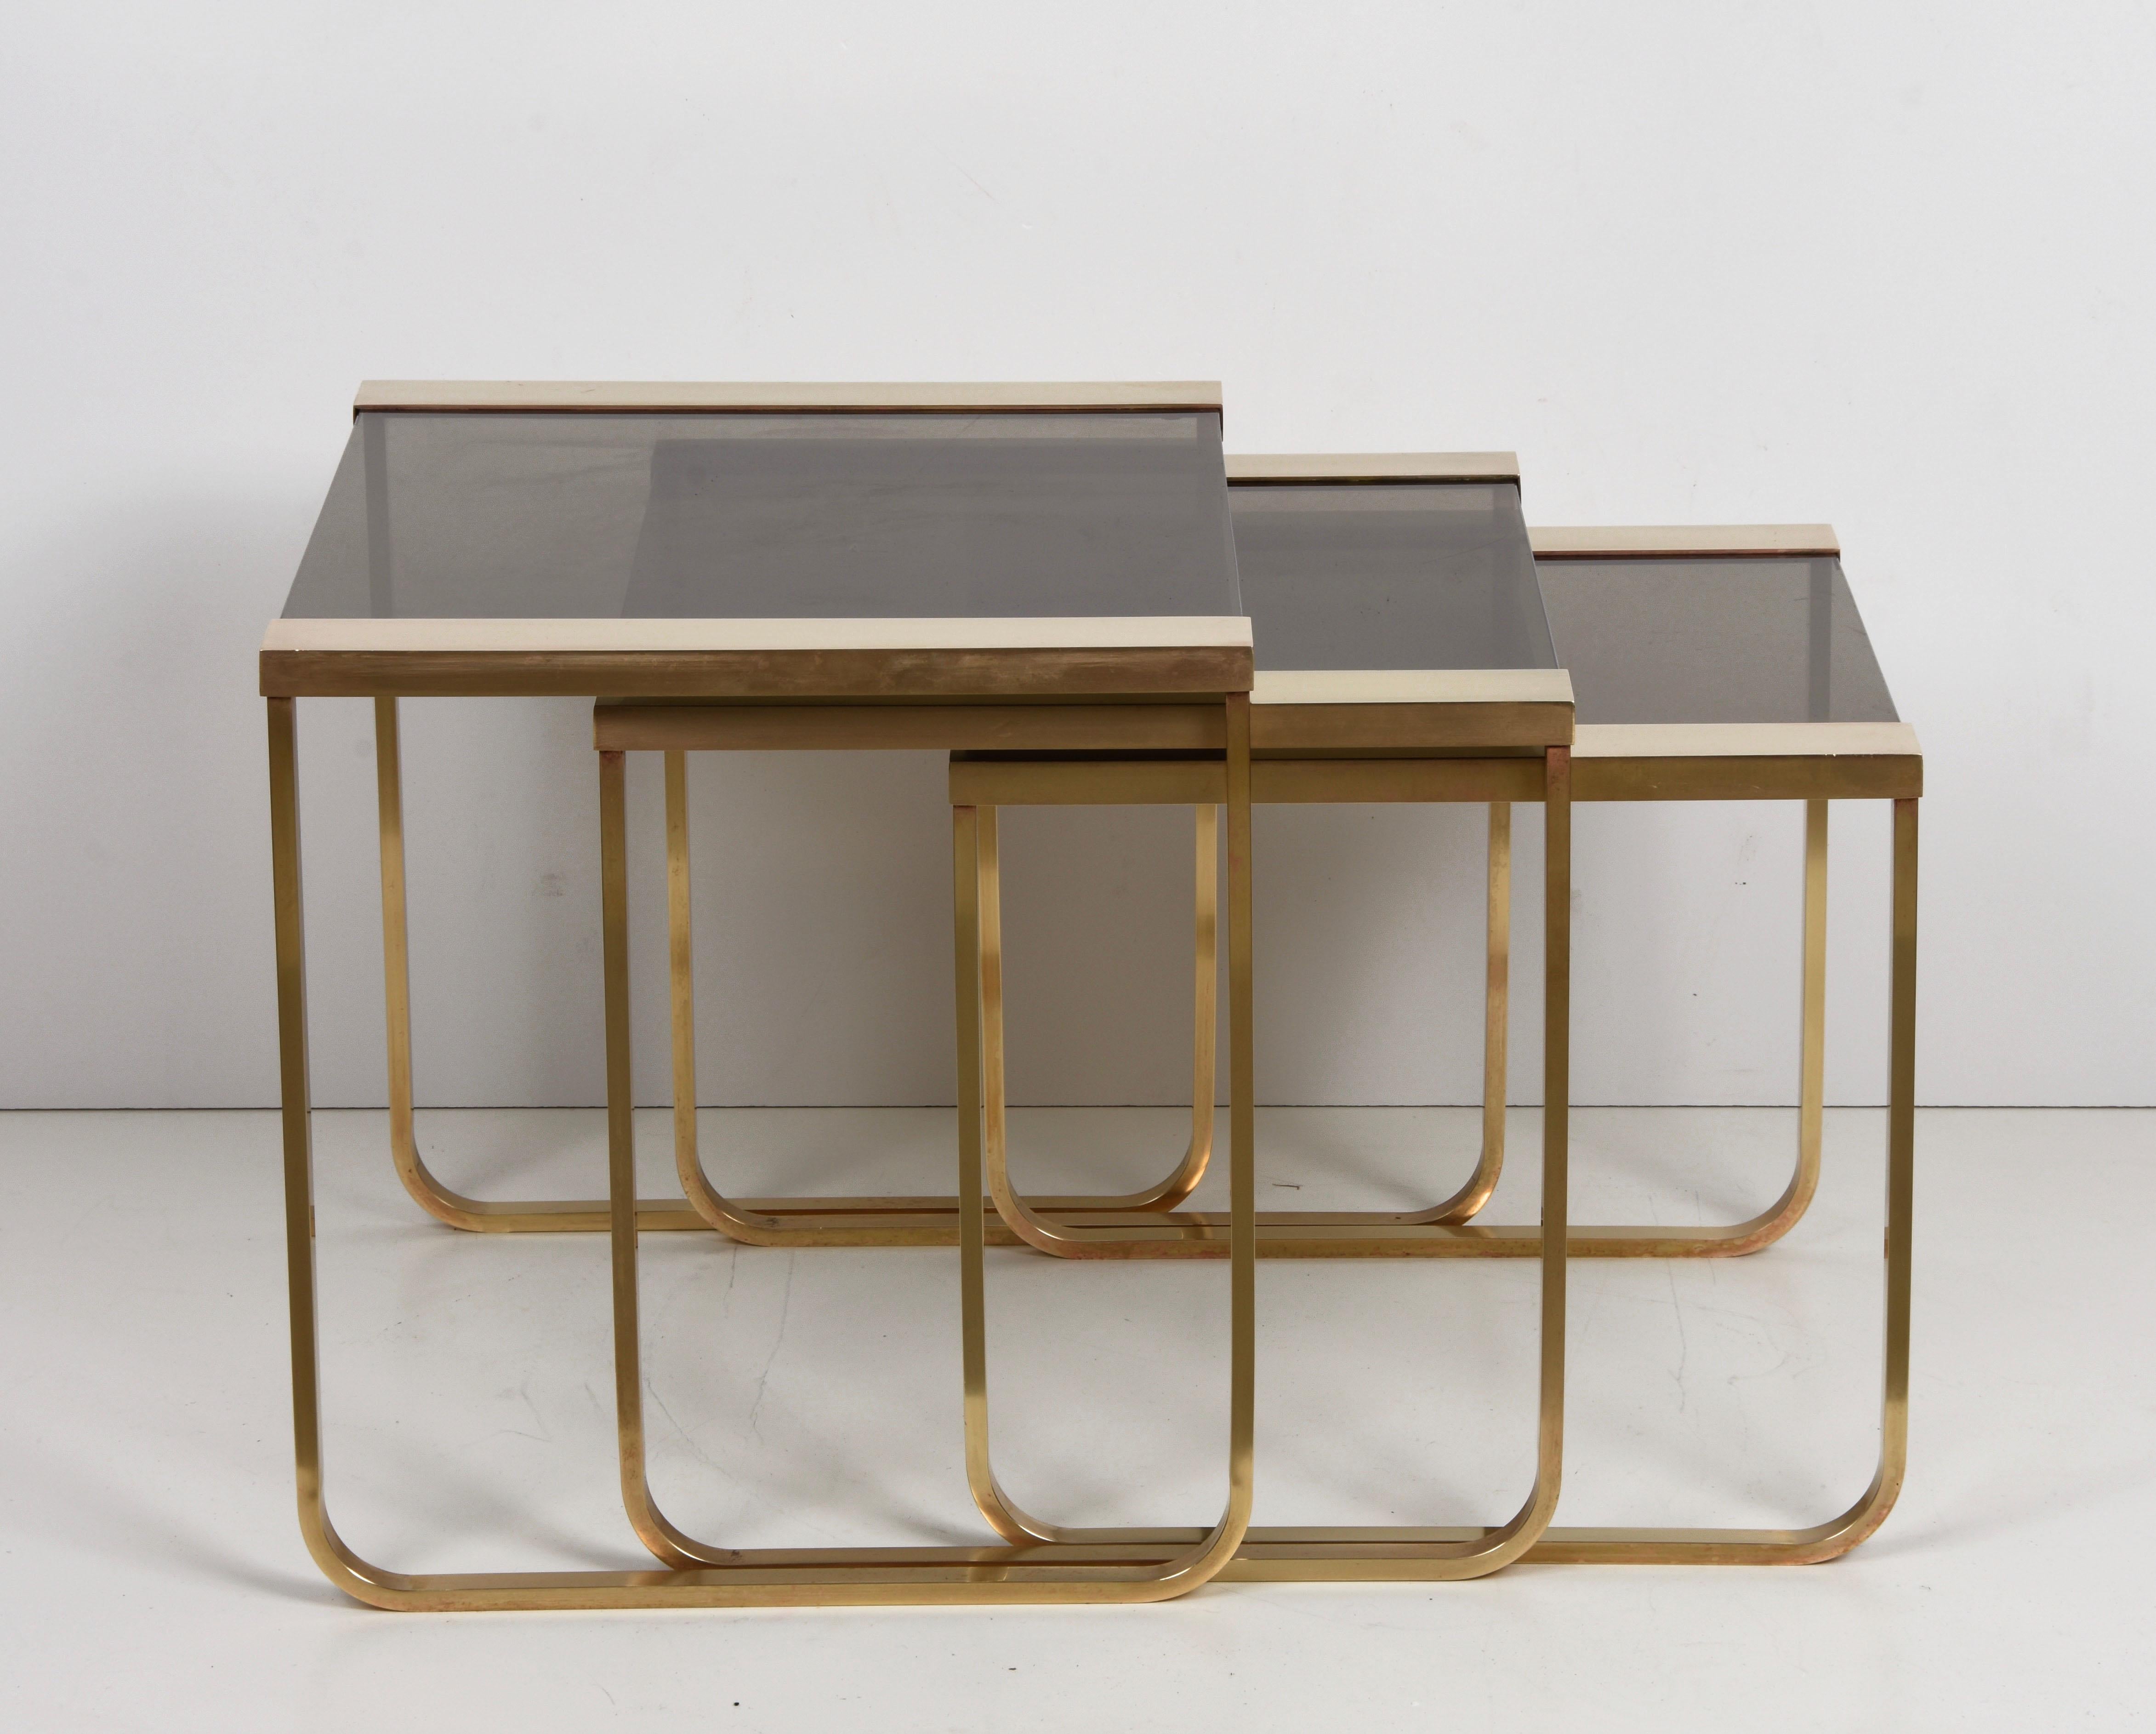 Midcentury Solid Brass and Smoked Glass France Interlocking Side Tables, 1970s For Sale 1